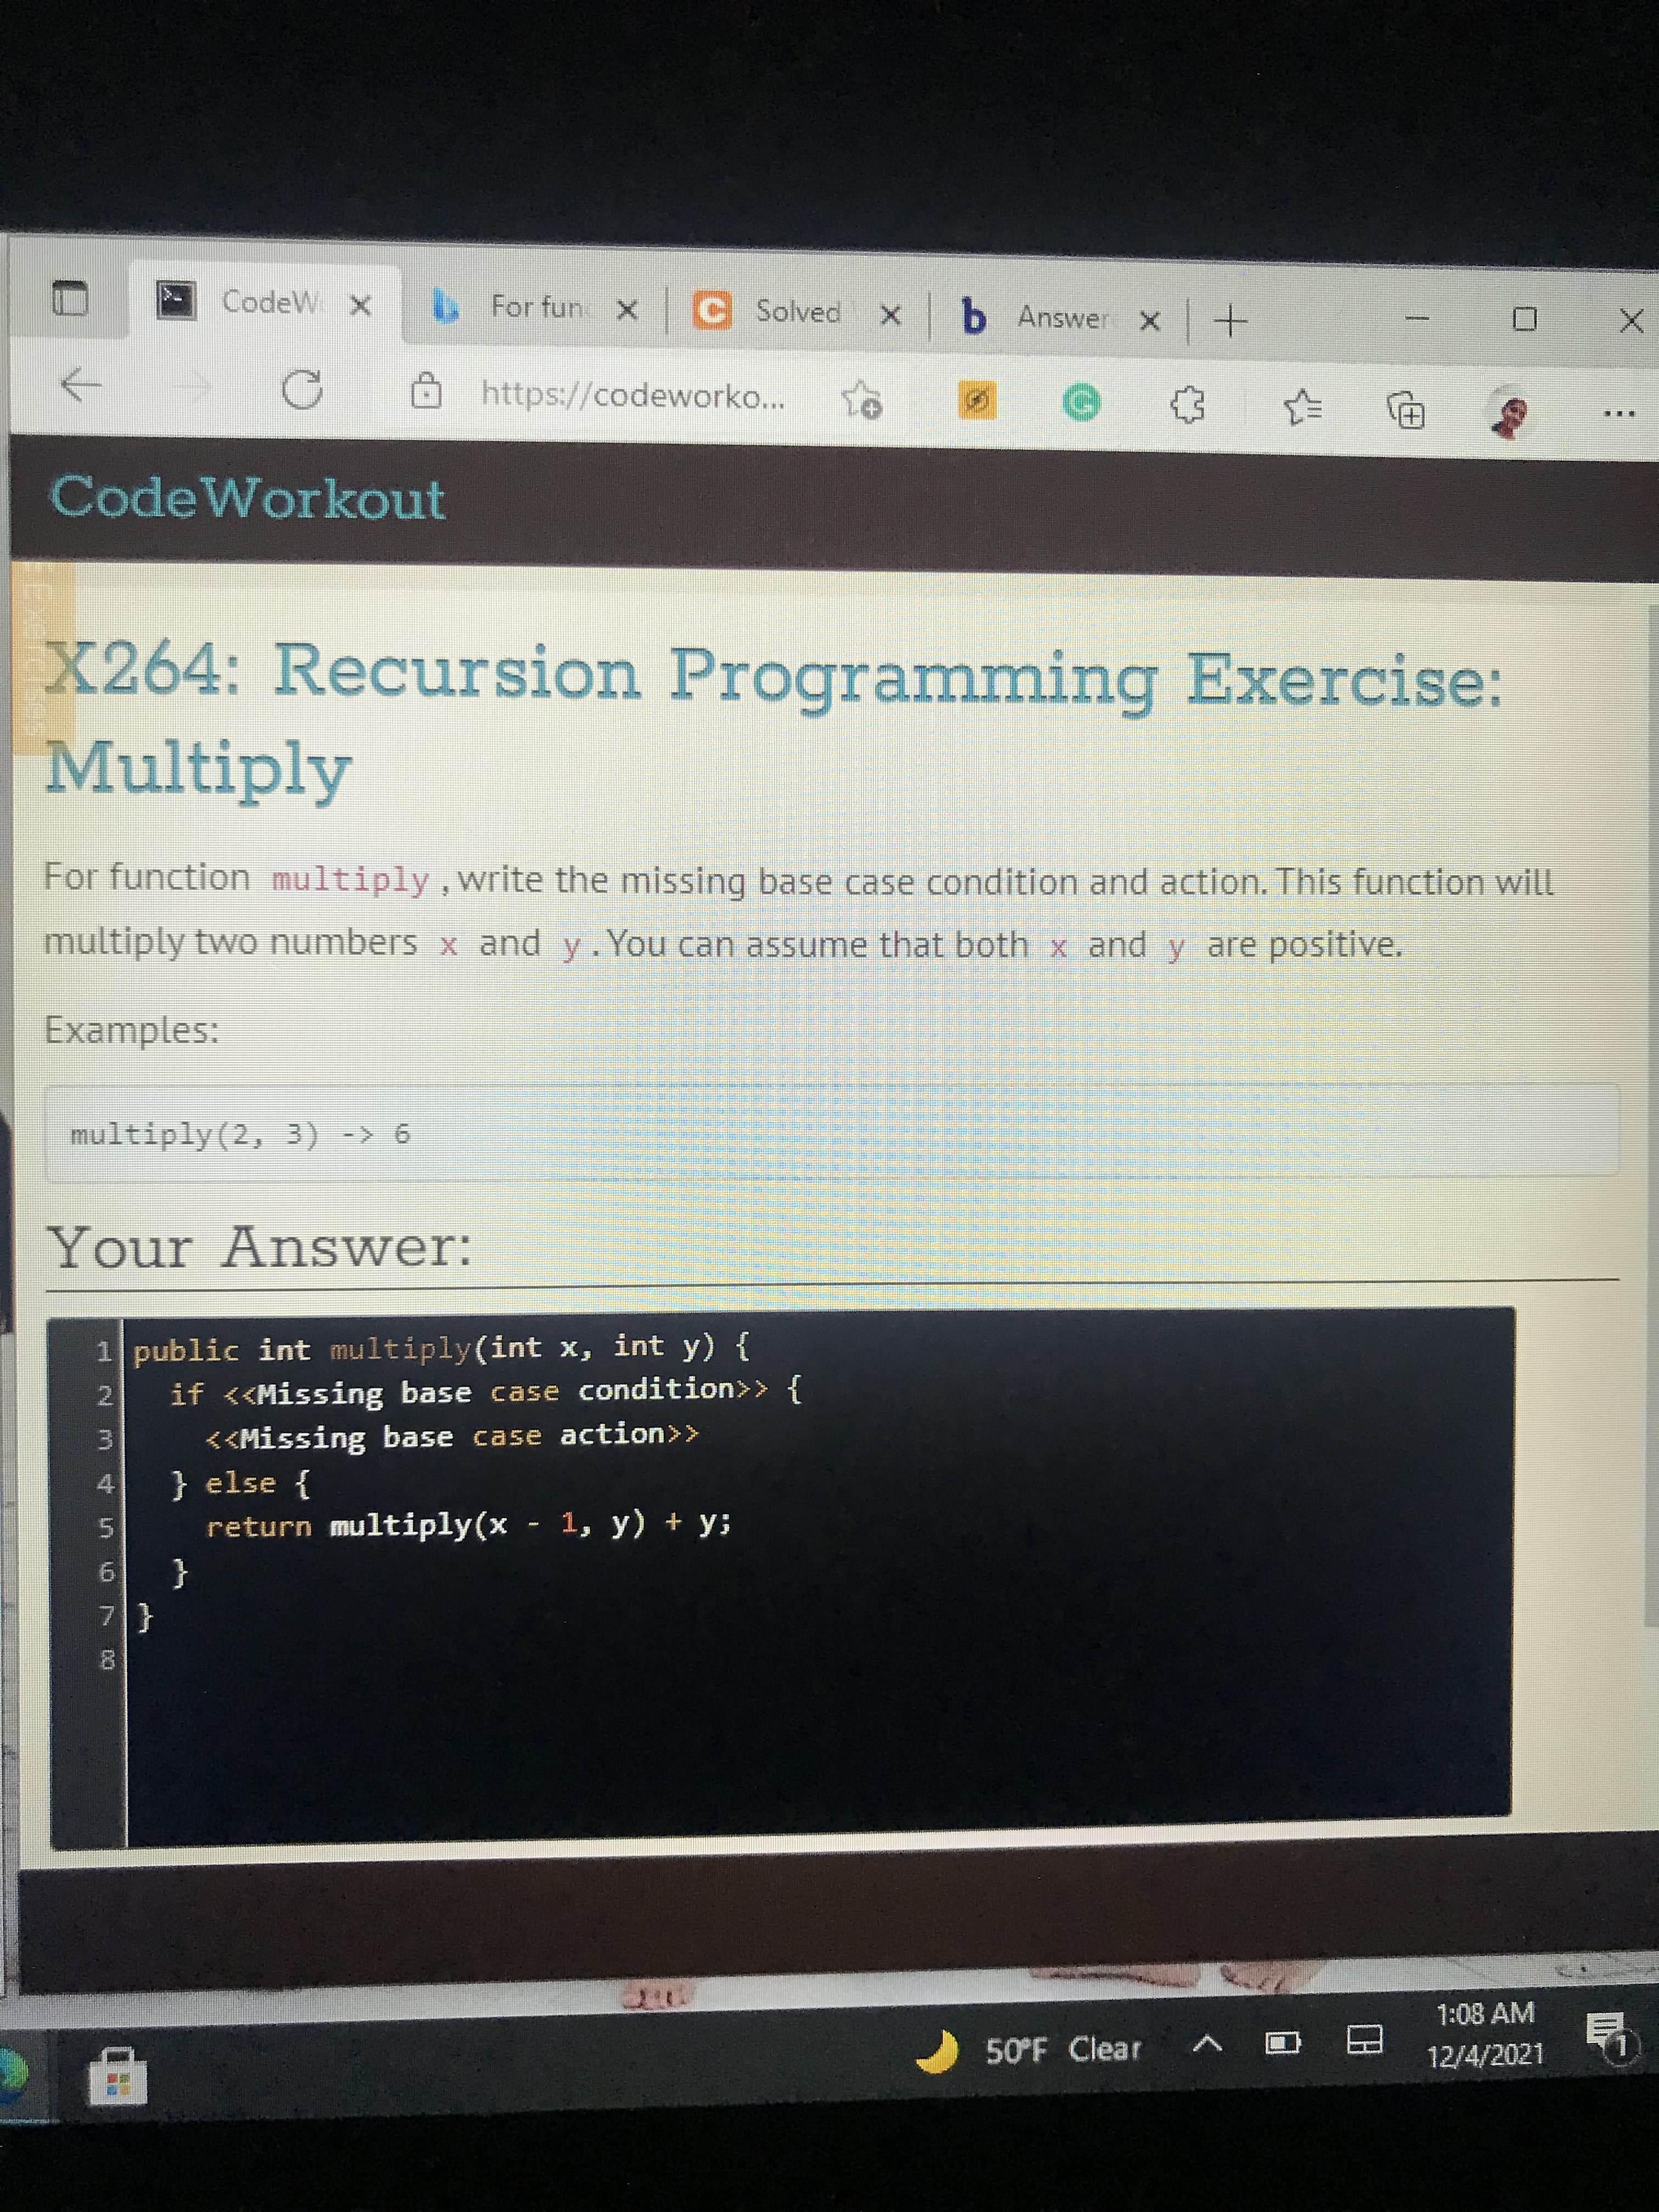 4.
CodeW. X
b For fun X Solved x b Answer x+
Ohttps://codeworko...
CodeWorkout
X264: Recursion Programming Exercise:
Multiply
For function multiply,write the missing base case condition and action. This function will
multiply two numbers x and y.You can assume that both x and y are positive.
Examples:
multiply(2, 3) -> 6
Your Answer:
1 public int multiply(int x, int y) {
2.
if <<Missing base case condition>> {
<<Missing base case action>>
} else {
return multiply(x 1, y) + y;
3.
5.
{
7.
1:08 AM
50°F Clear
日
